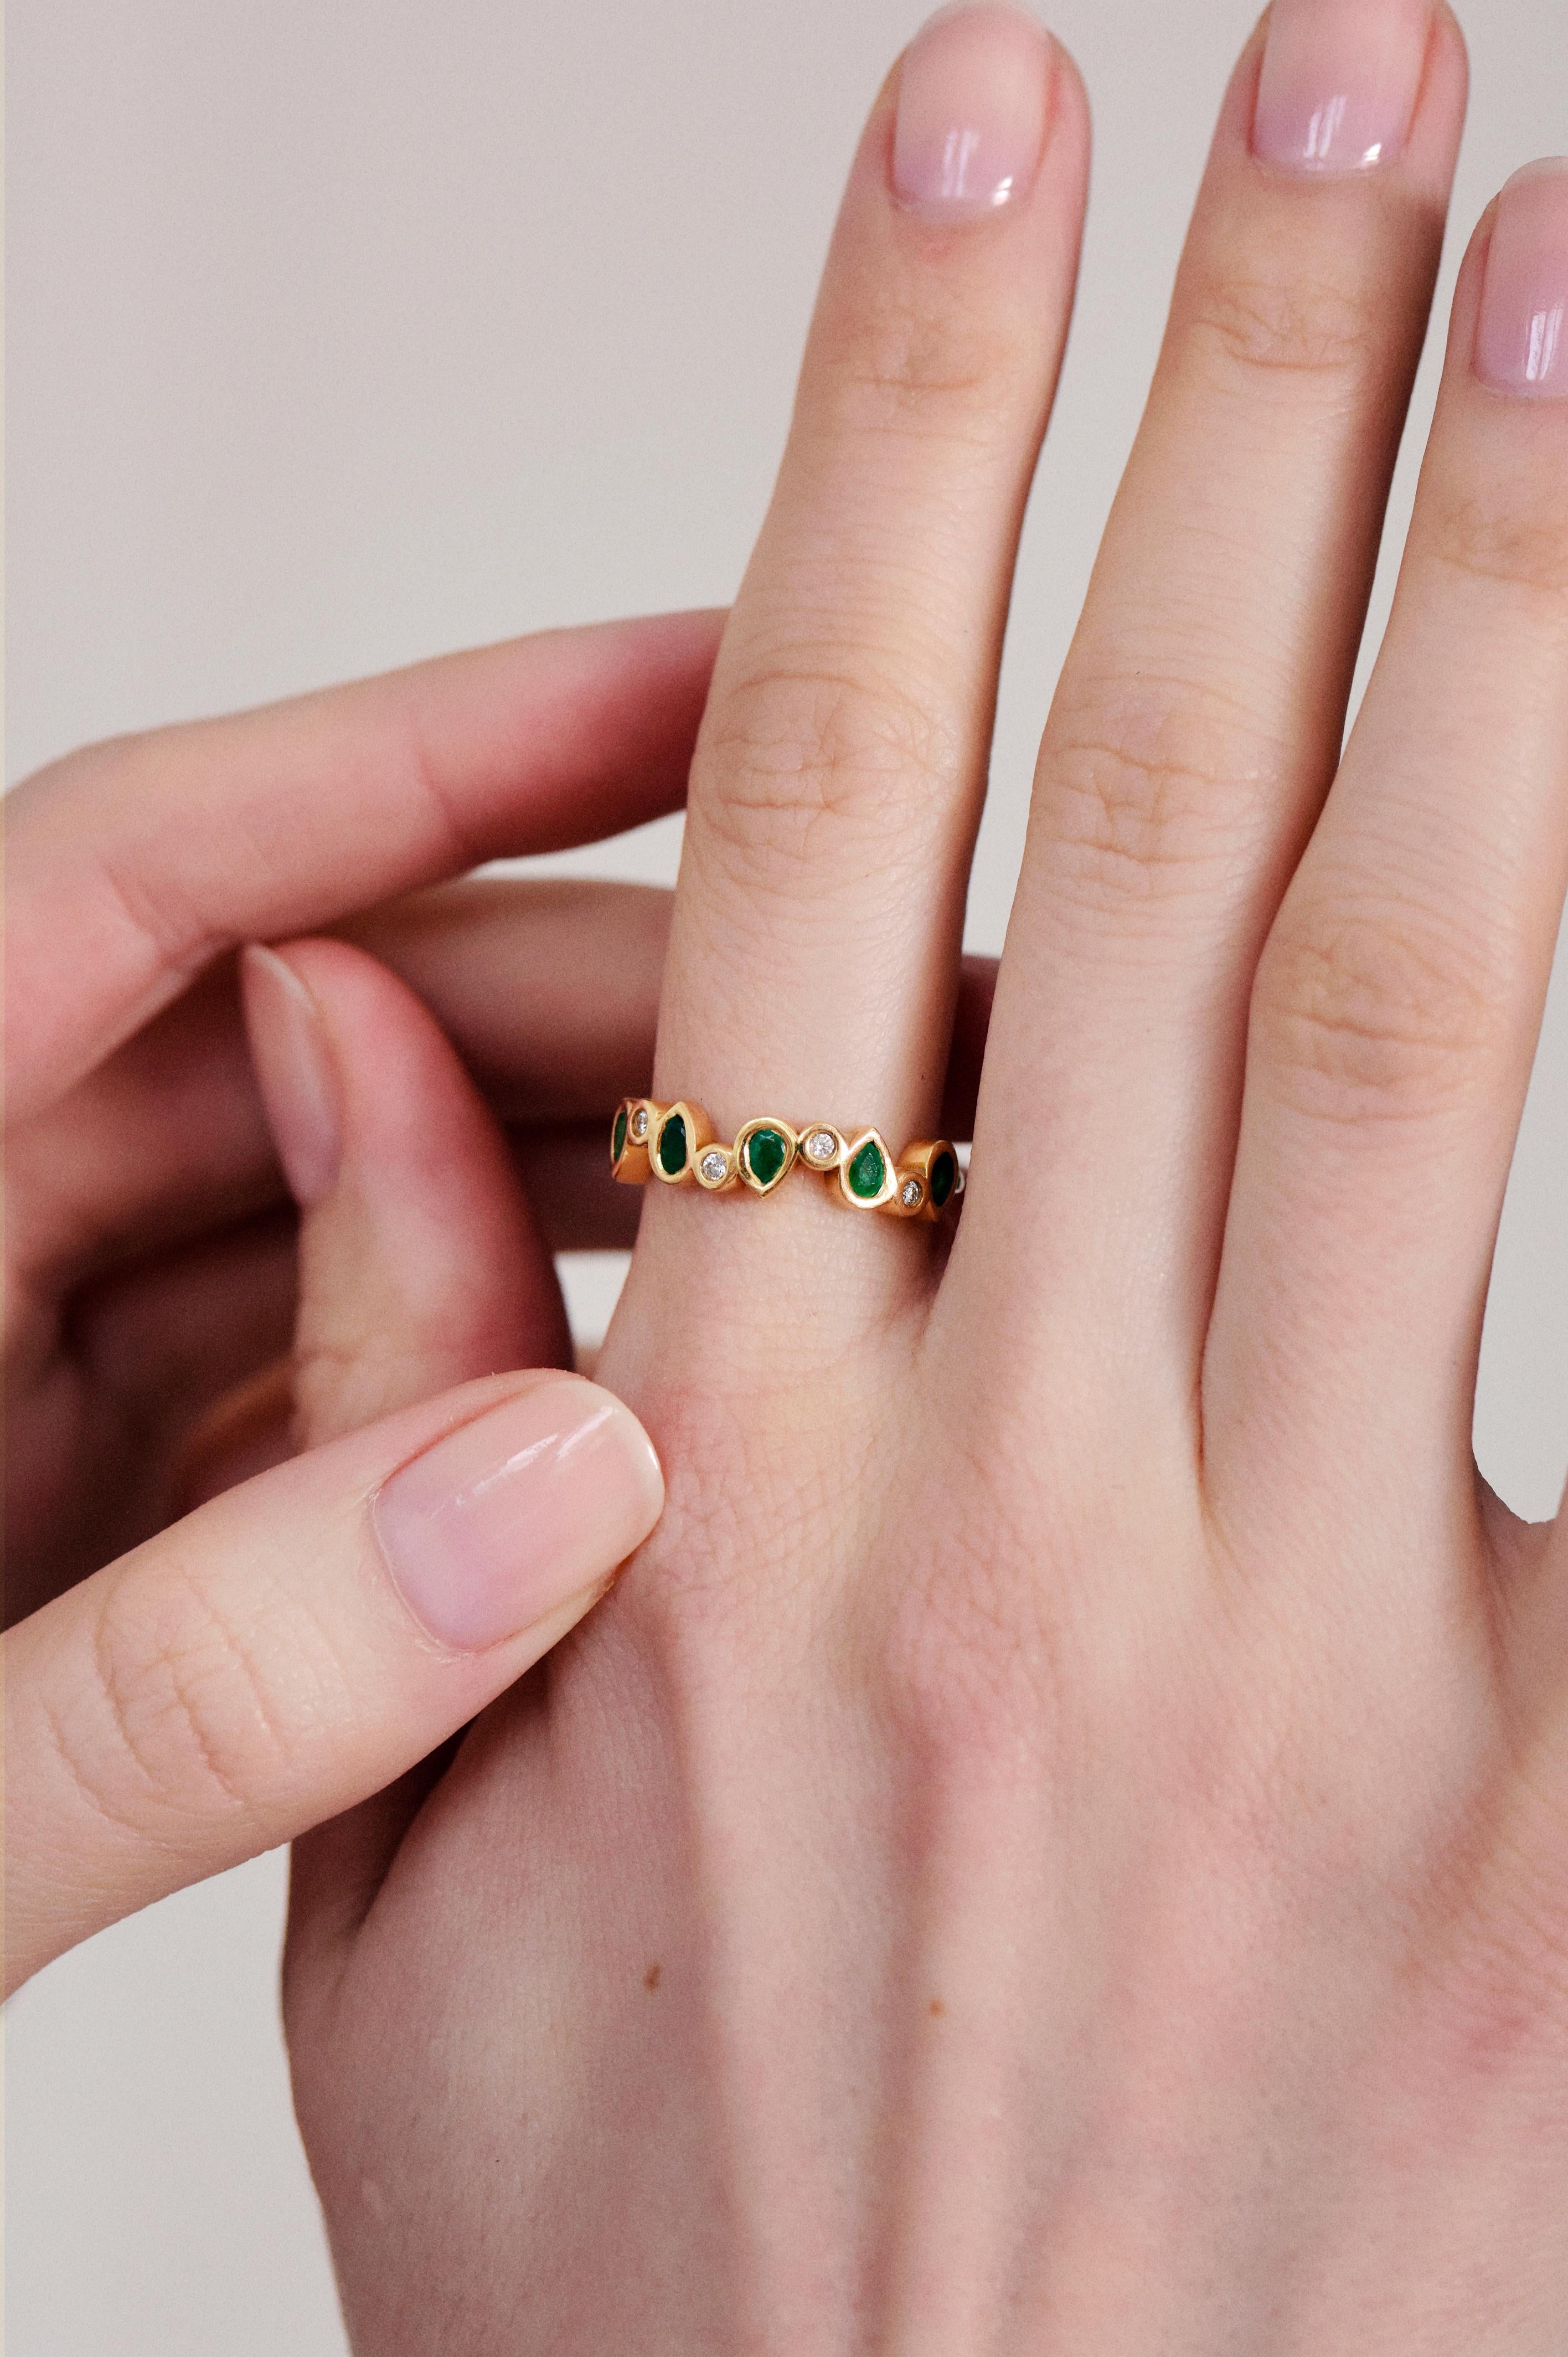 An exceptional ring, Duna surprises with its details and splendid stones. It combines white diamonds and emeralds, as desired, in a beautiful drop pattern that you won't see anywhere else. Wear it alone or dare to combine the two colors. The Duna